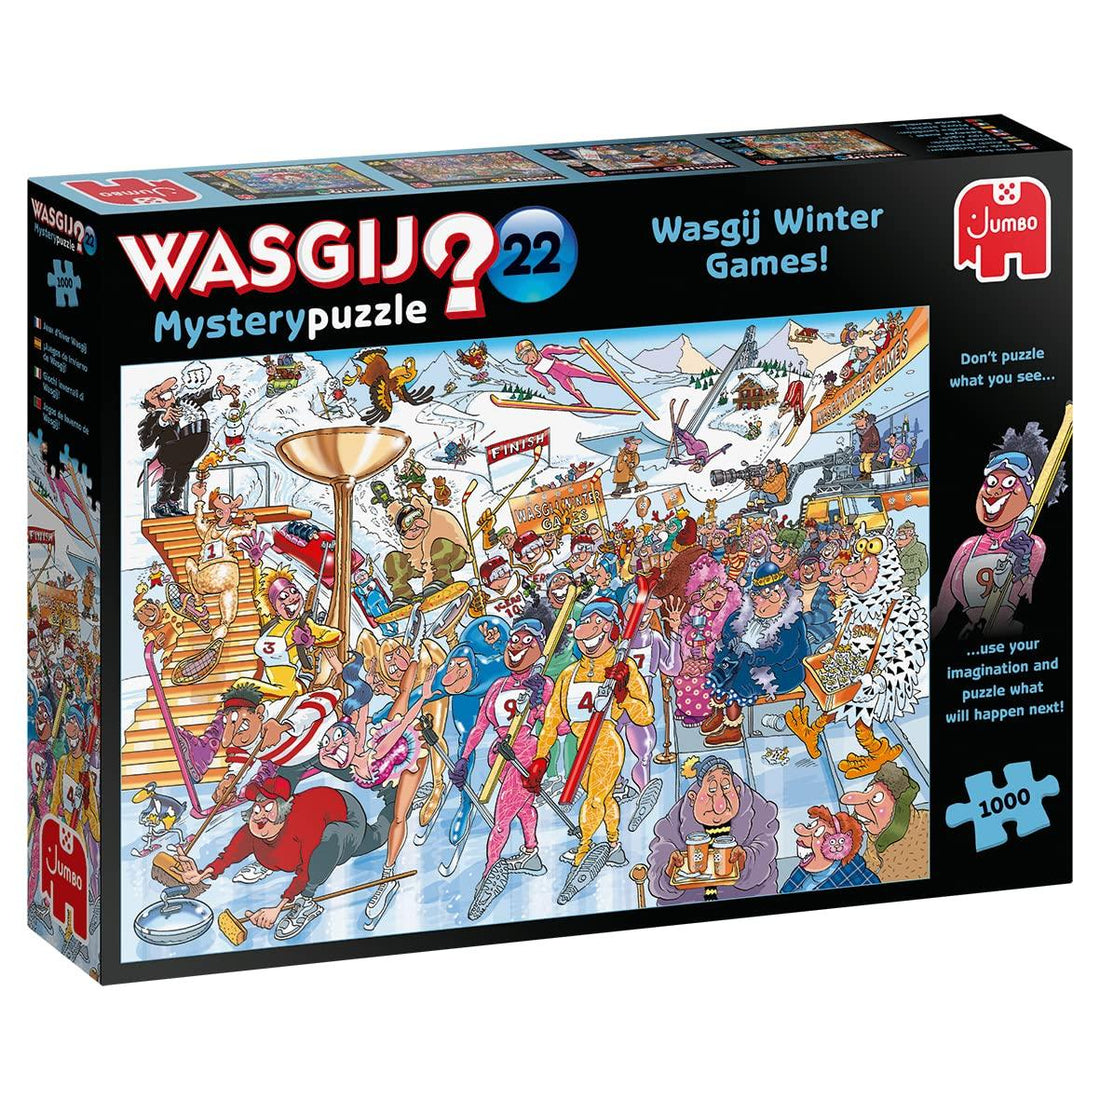 Jumbo, Wasgij Christmas 1, Special Delivery 1000pc Jigsaw Puzzle